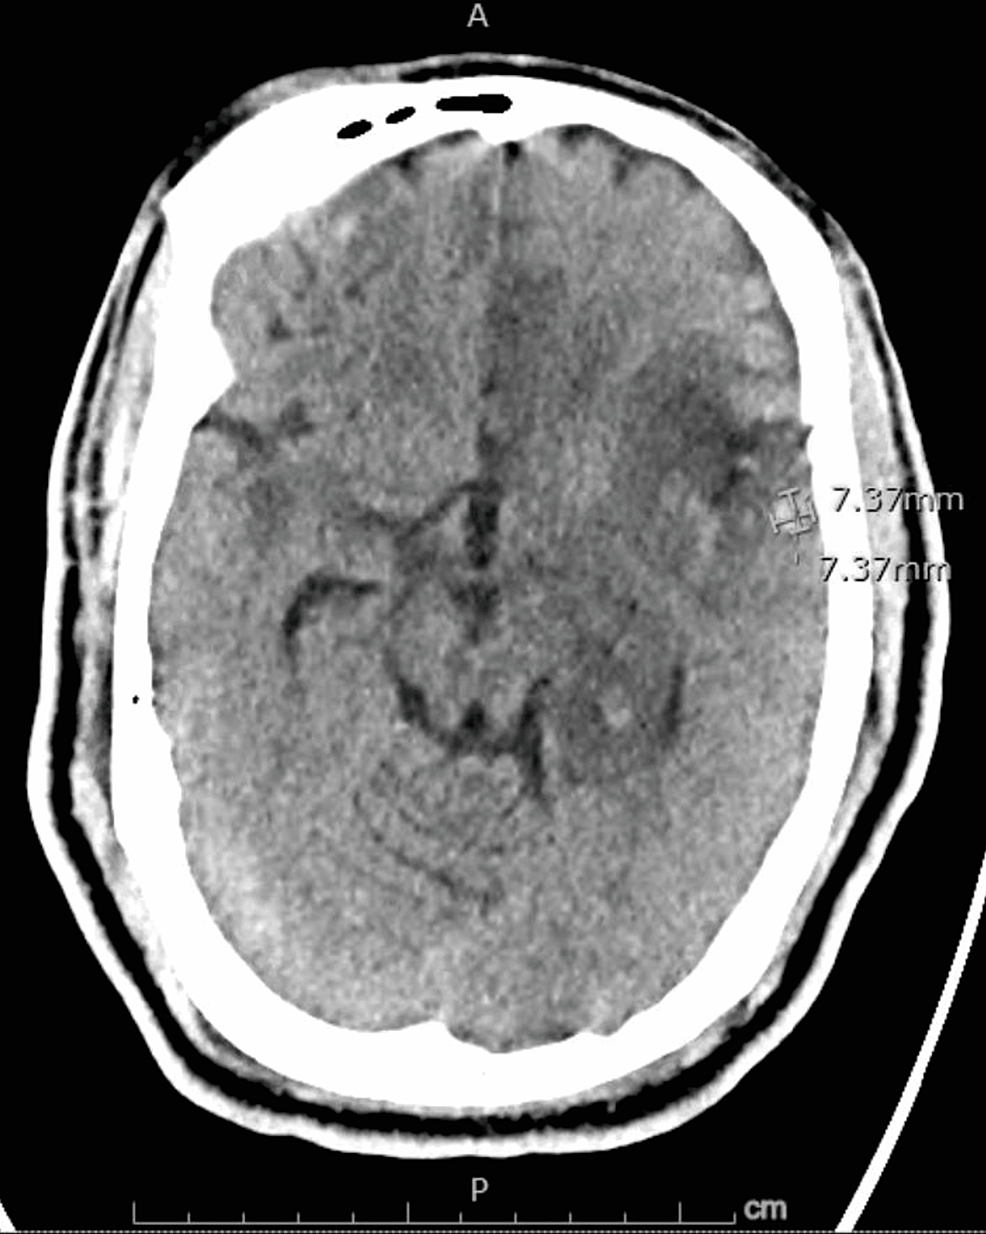 Non-contrast-computed-axial-tomography-scan-of-the-head-showing-a-hemorrhage,-measuring-7.37-x-7.37-x-7-mm-along-the-lateral-aspect-of-the-left-temporal-lobe.